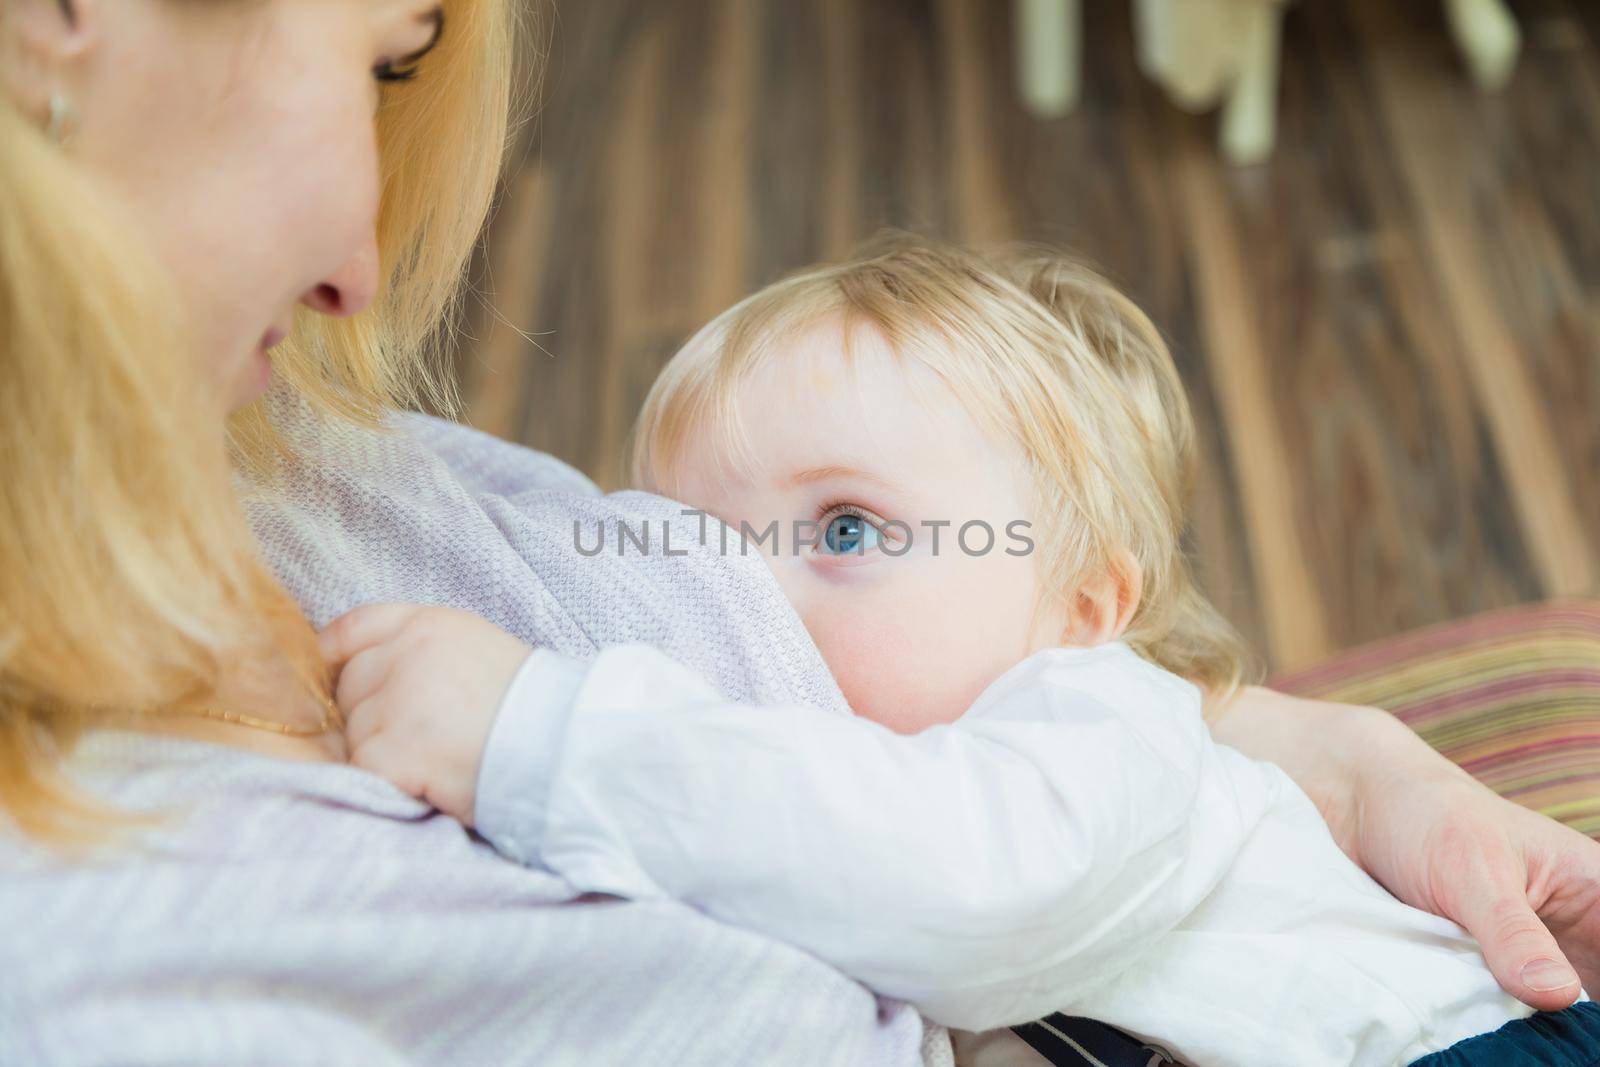 Mom is breastfeeding the baby. She looks at the baby with love and tenderness by Yurich32